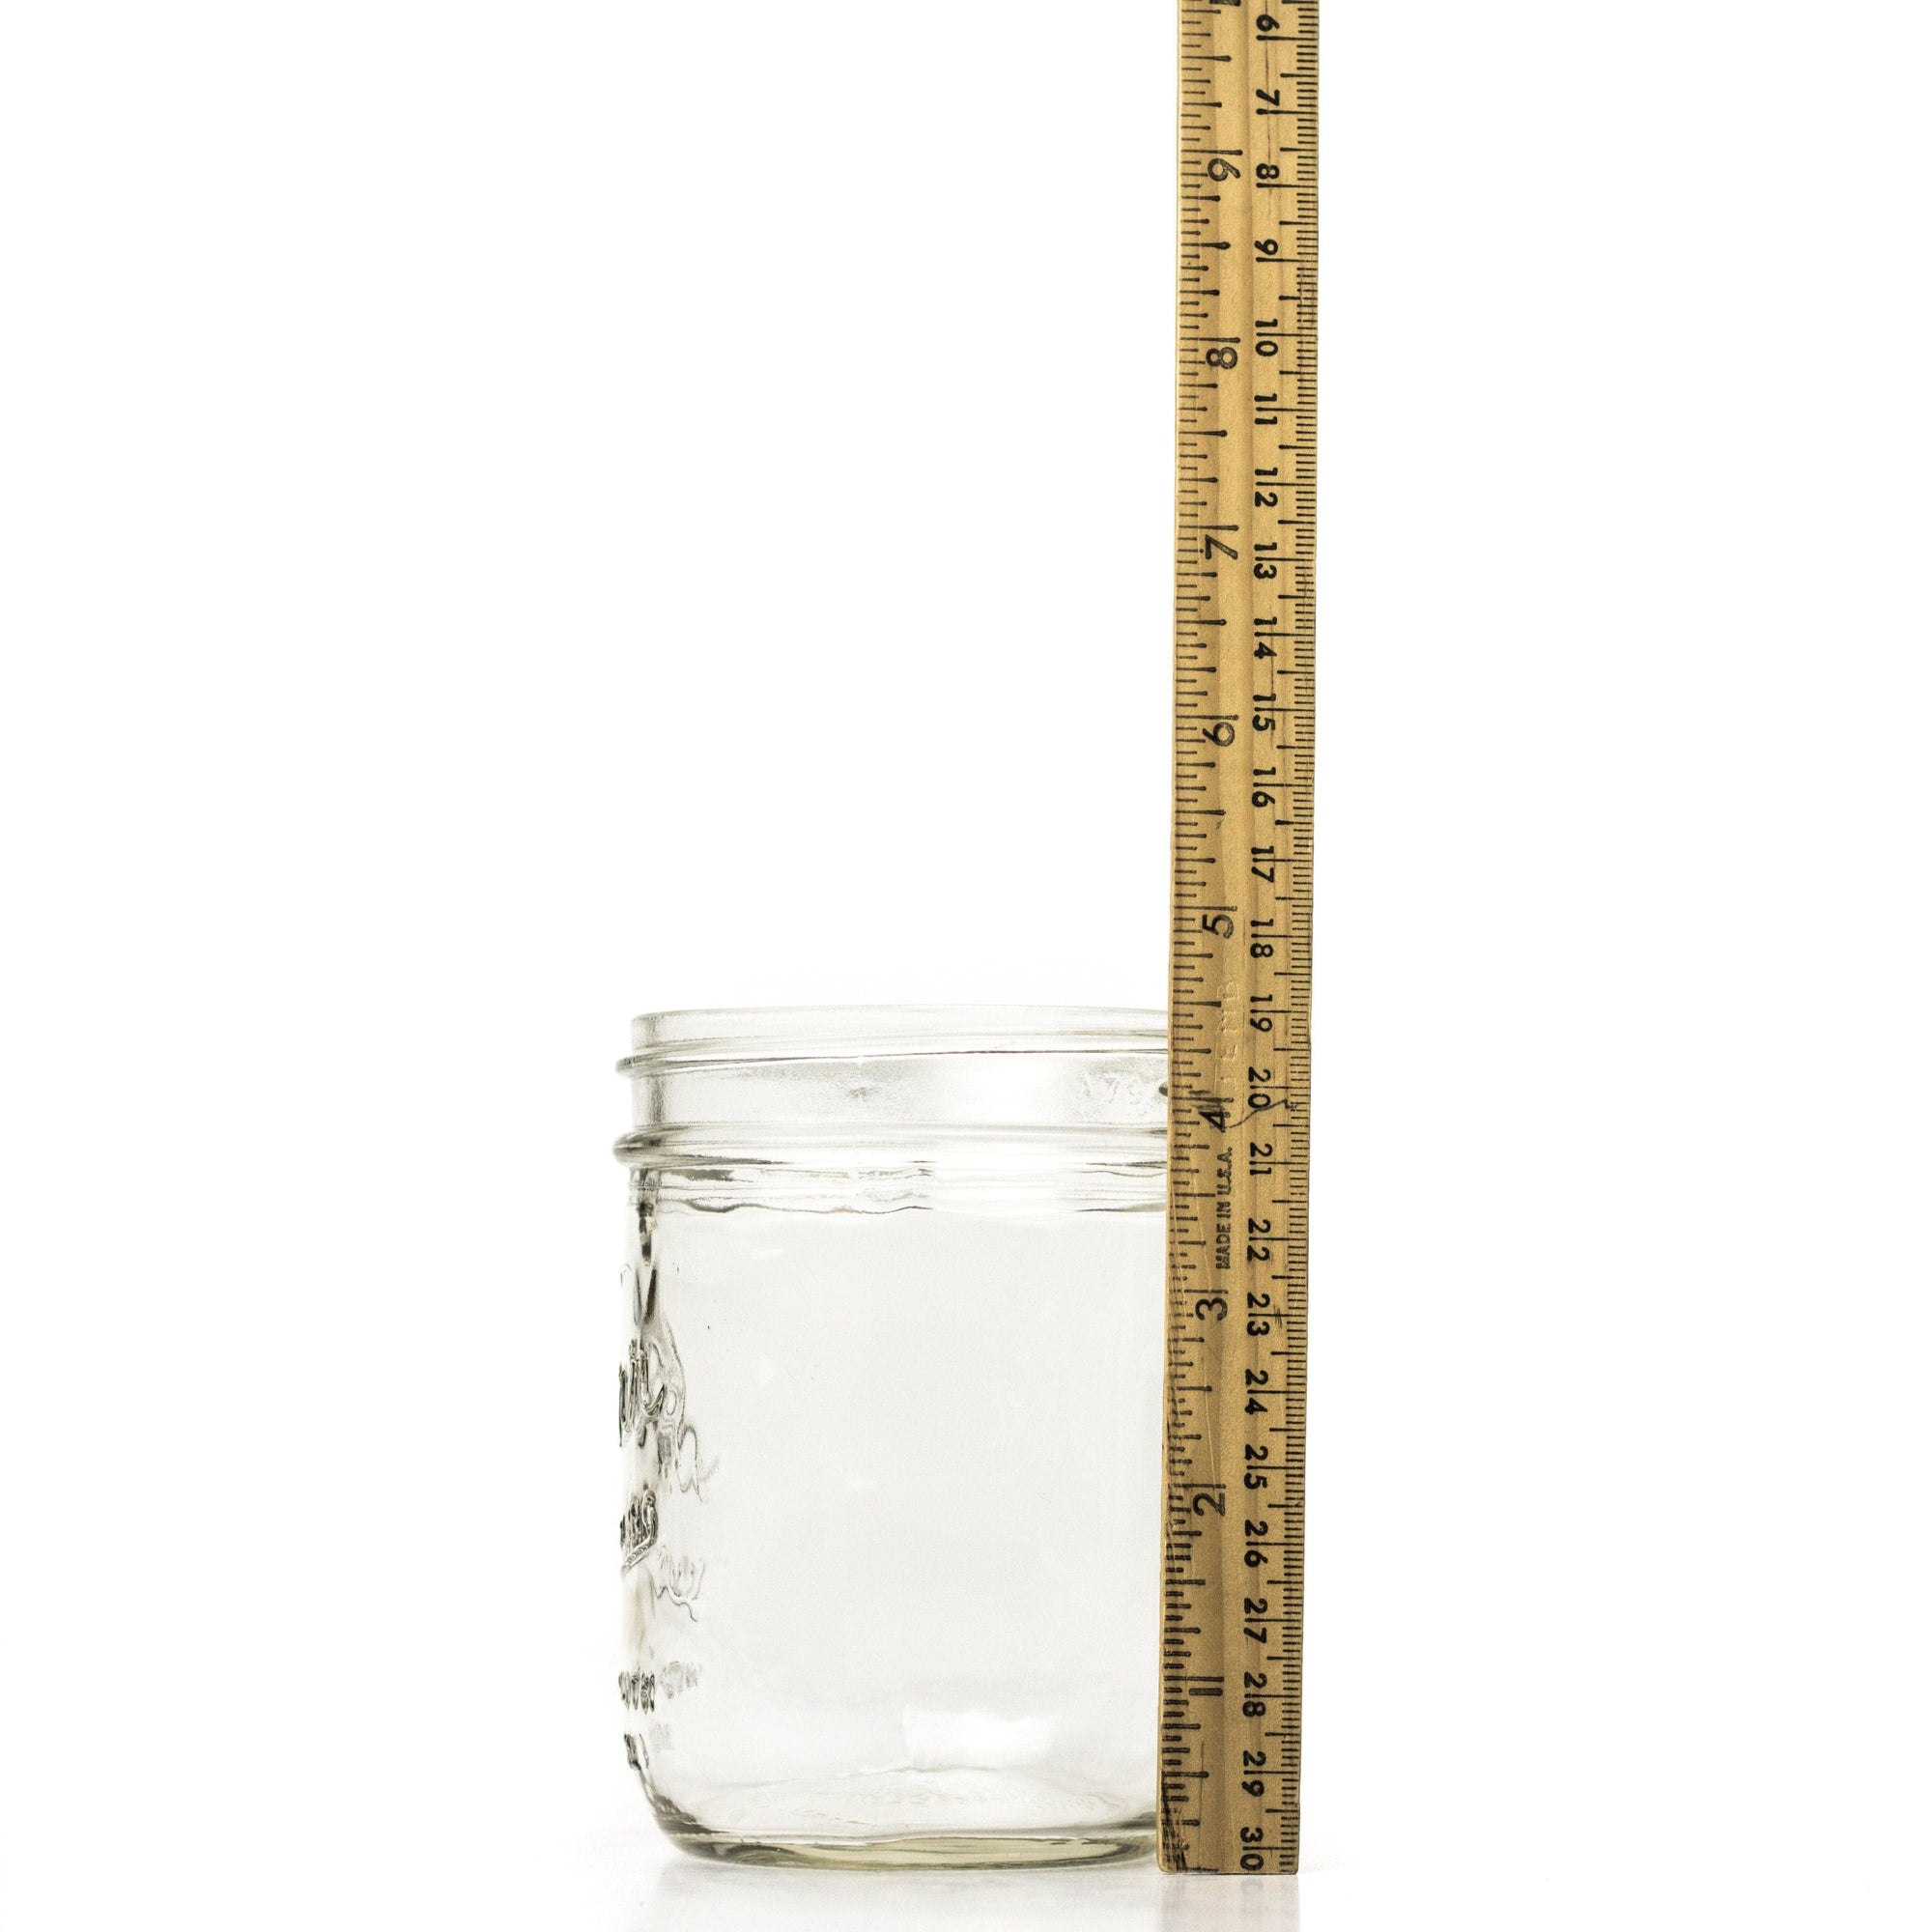 Wide mouth pint mason jar side view with a ruler for height comparison